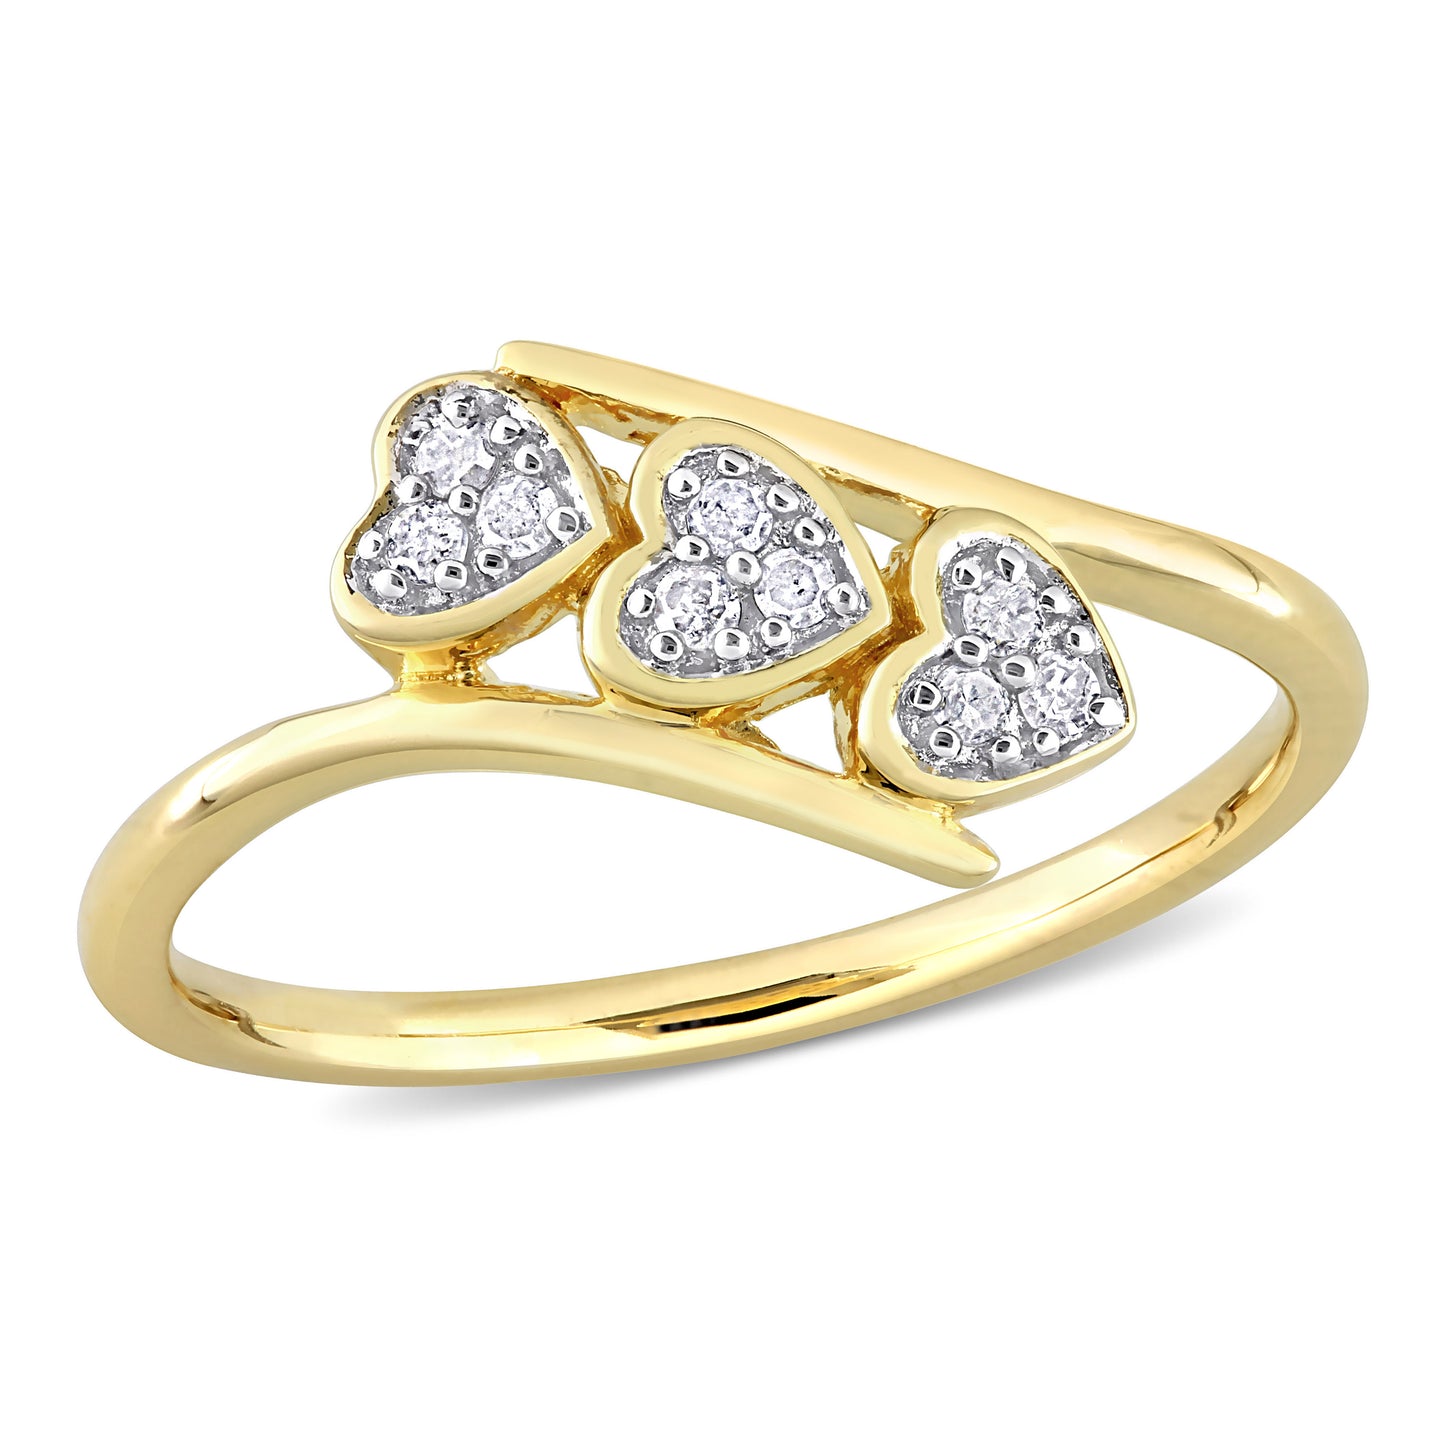 Triple Heart Diamond Ring in 18K Yellow Gold Plated